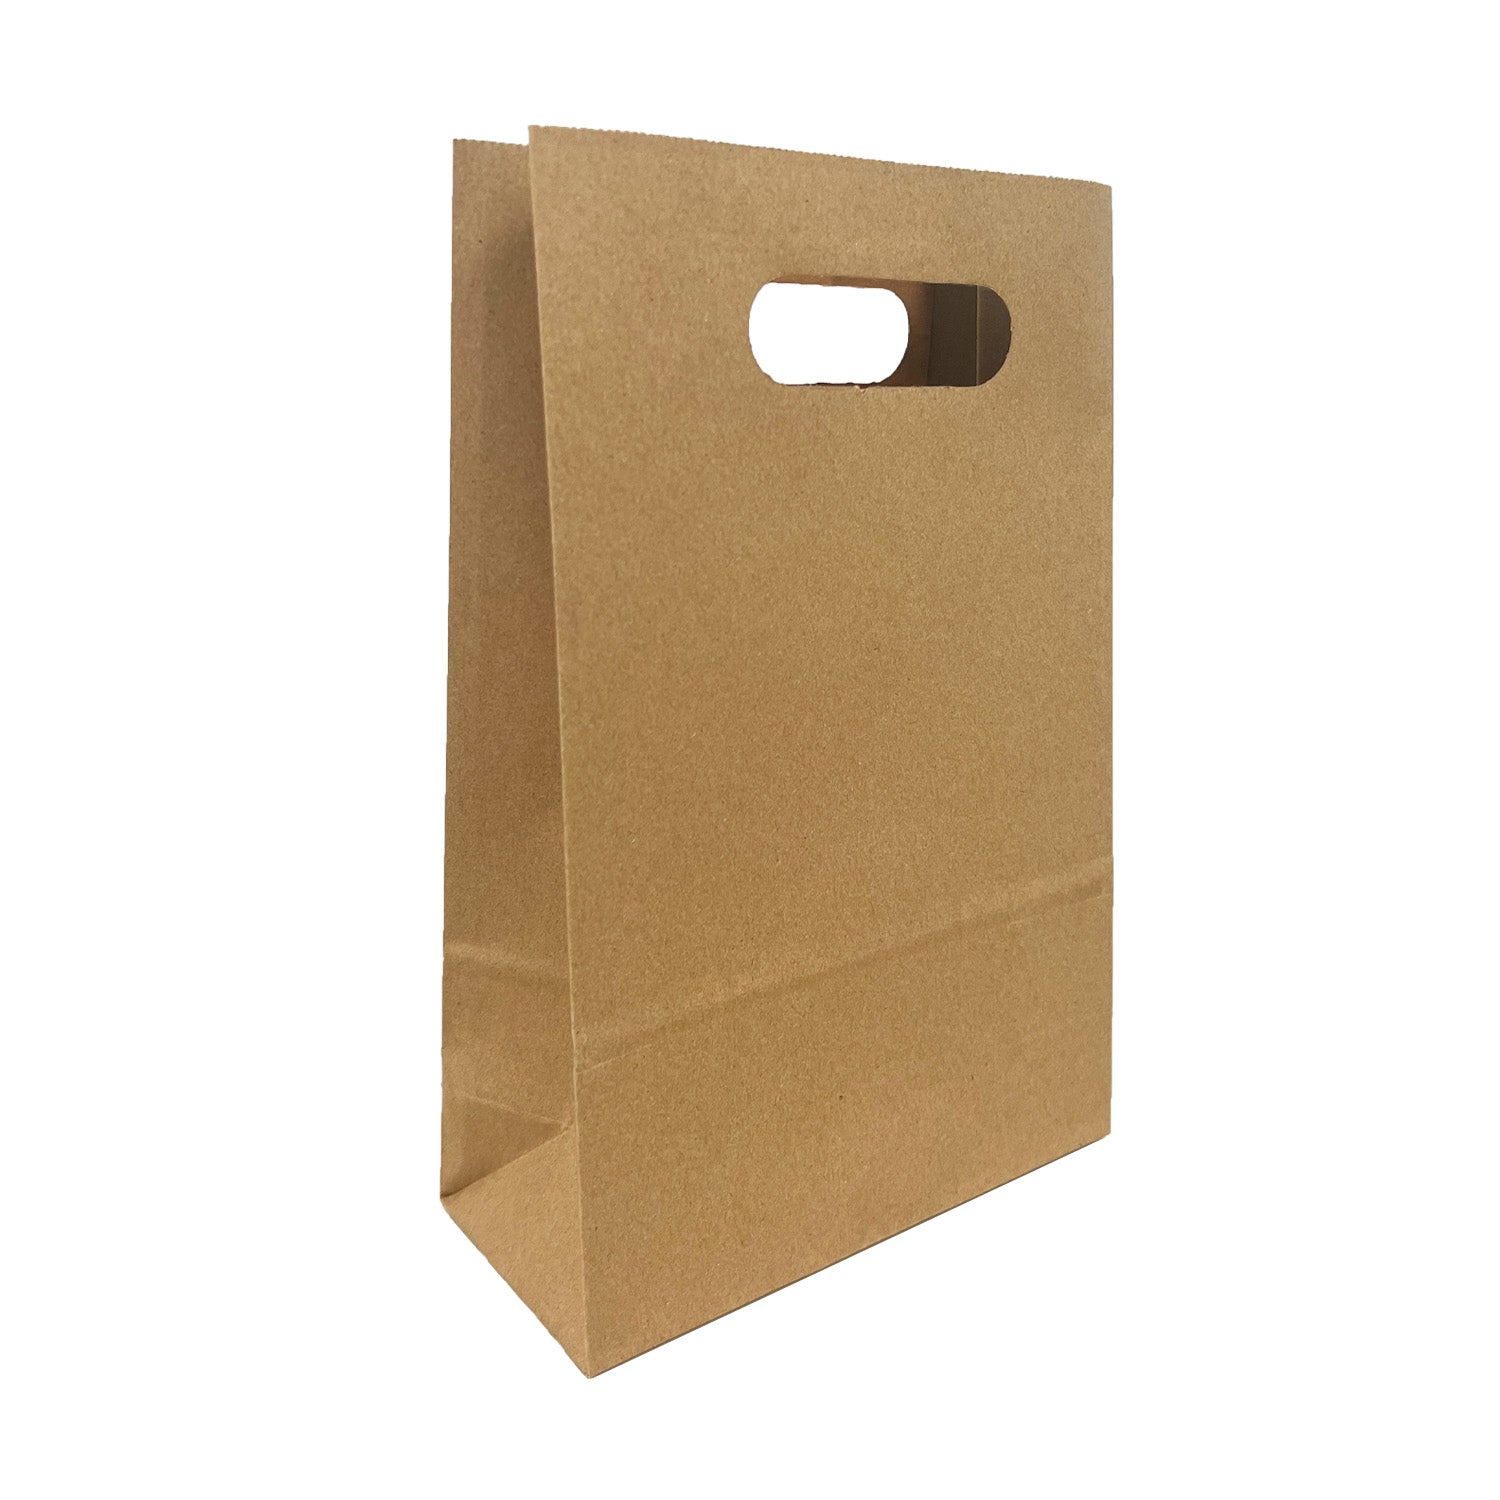 250pcs, Snack, 7 1/8x3 1/4x10 3/4 inches, Kraft Paper Bags, with Die Cut Handles